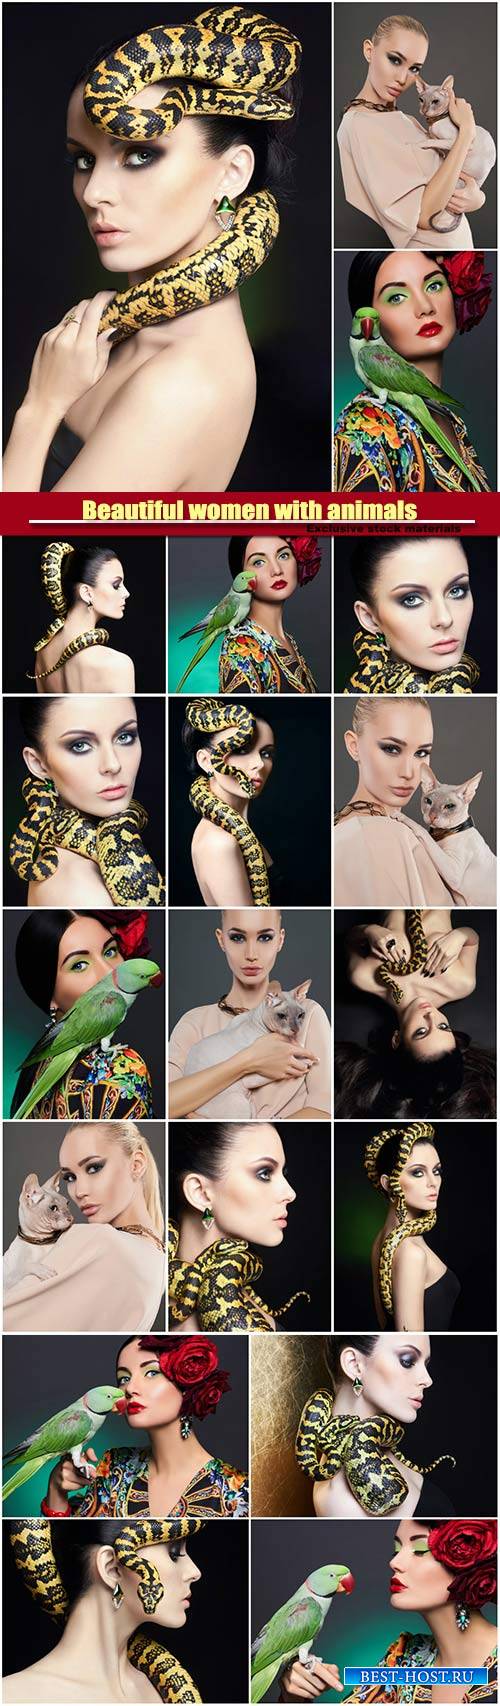 Beautiful women with animals, girl with snake girl with a parrot, girl with ...